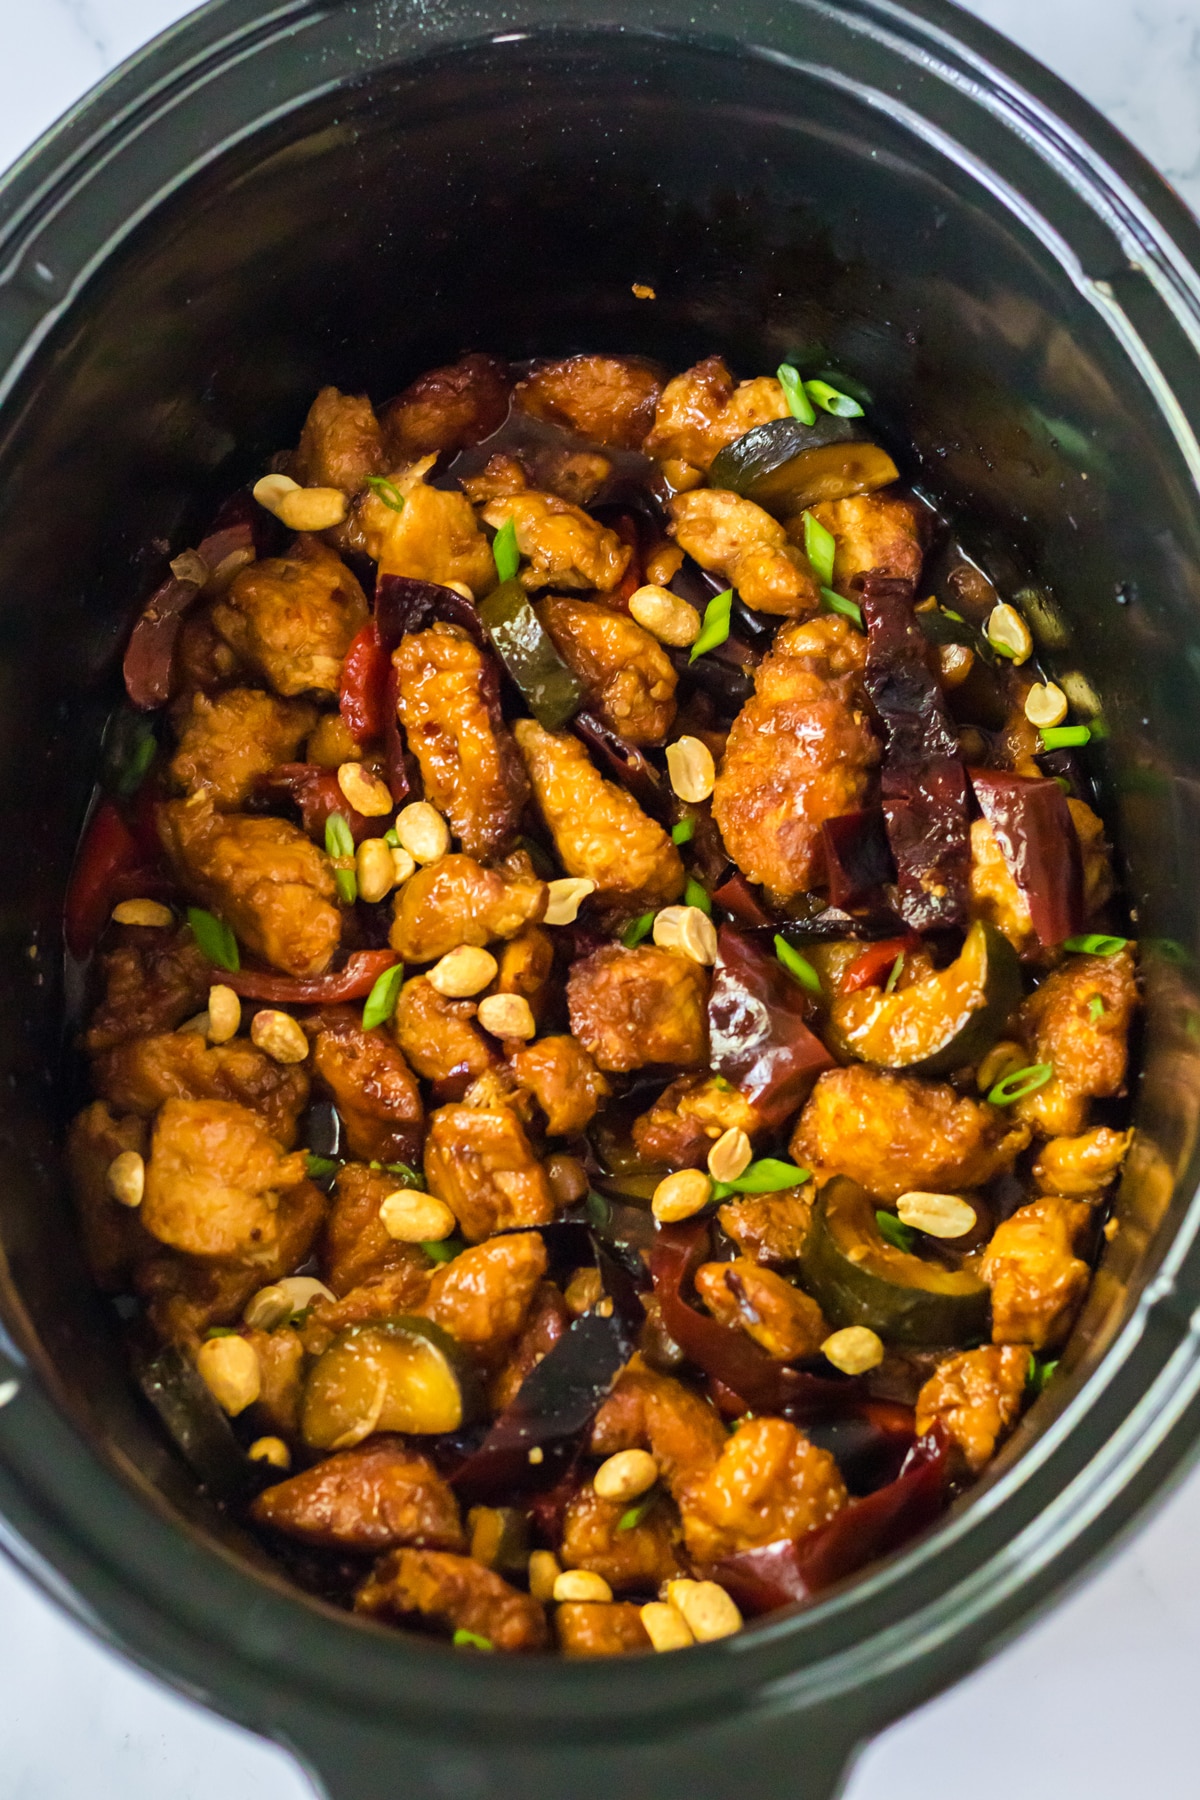 Cook the Slow Cooker Kung Pao Chicken for 4 hours.